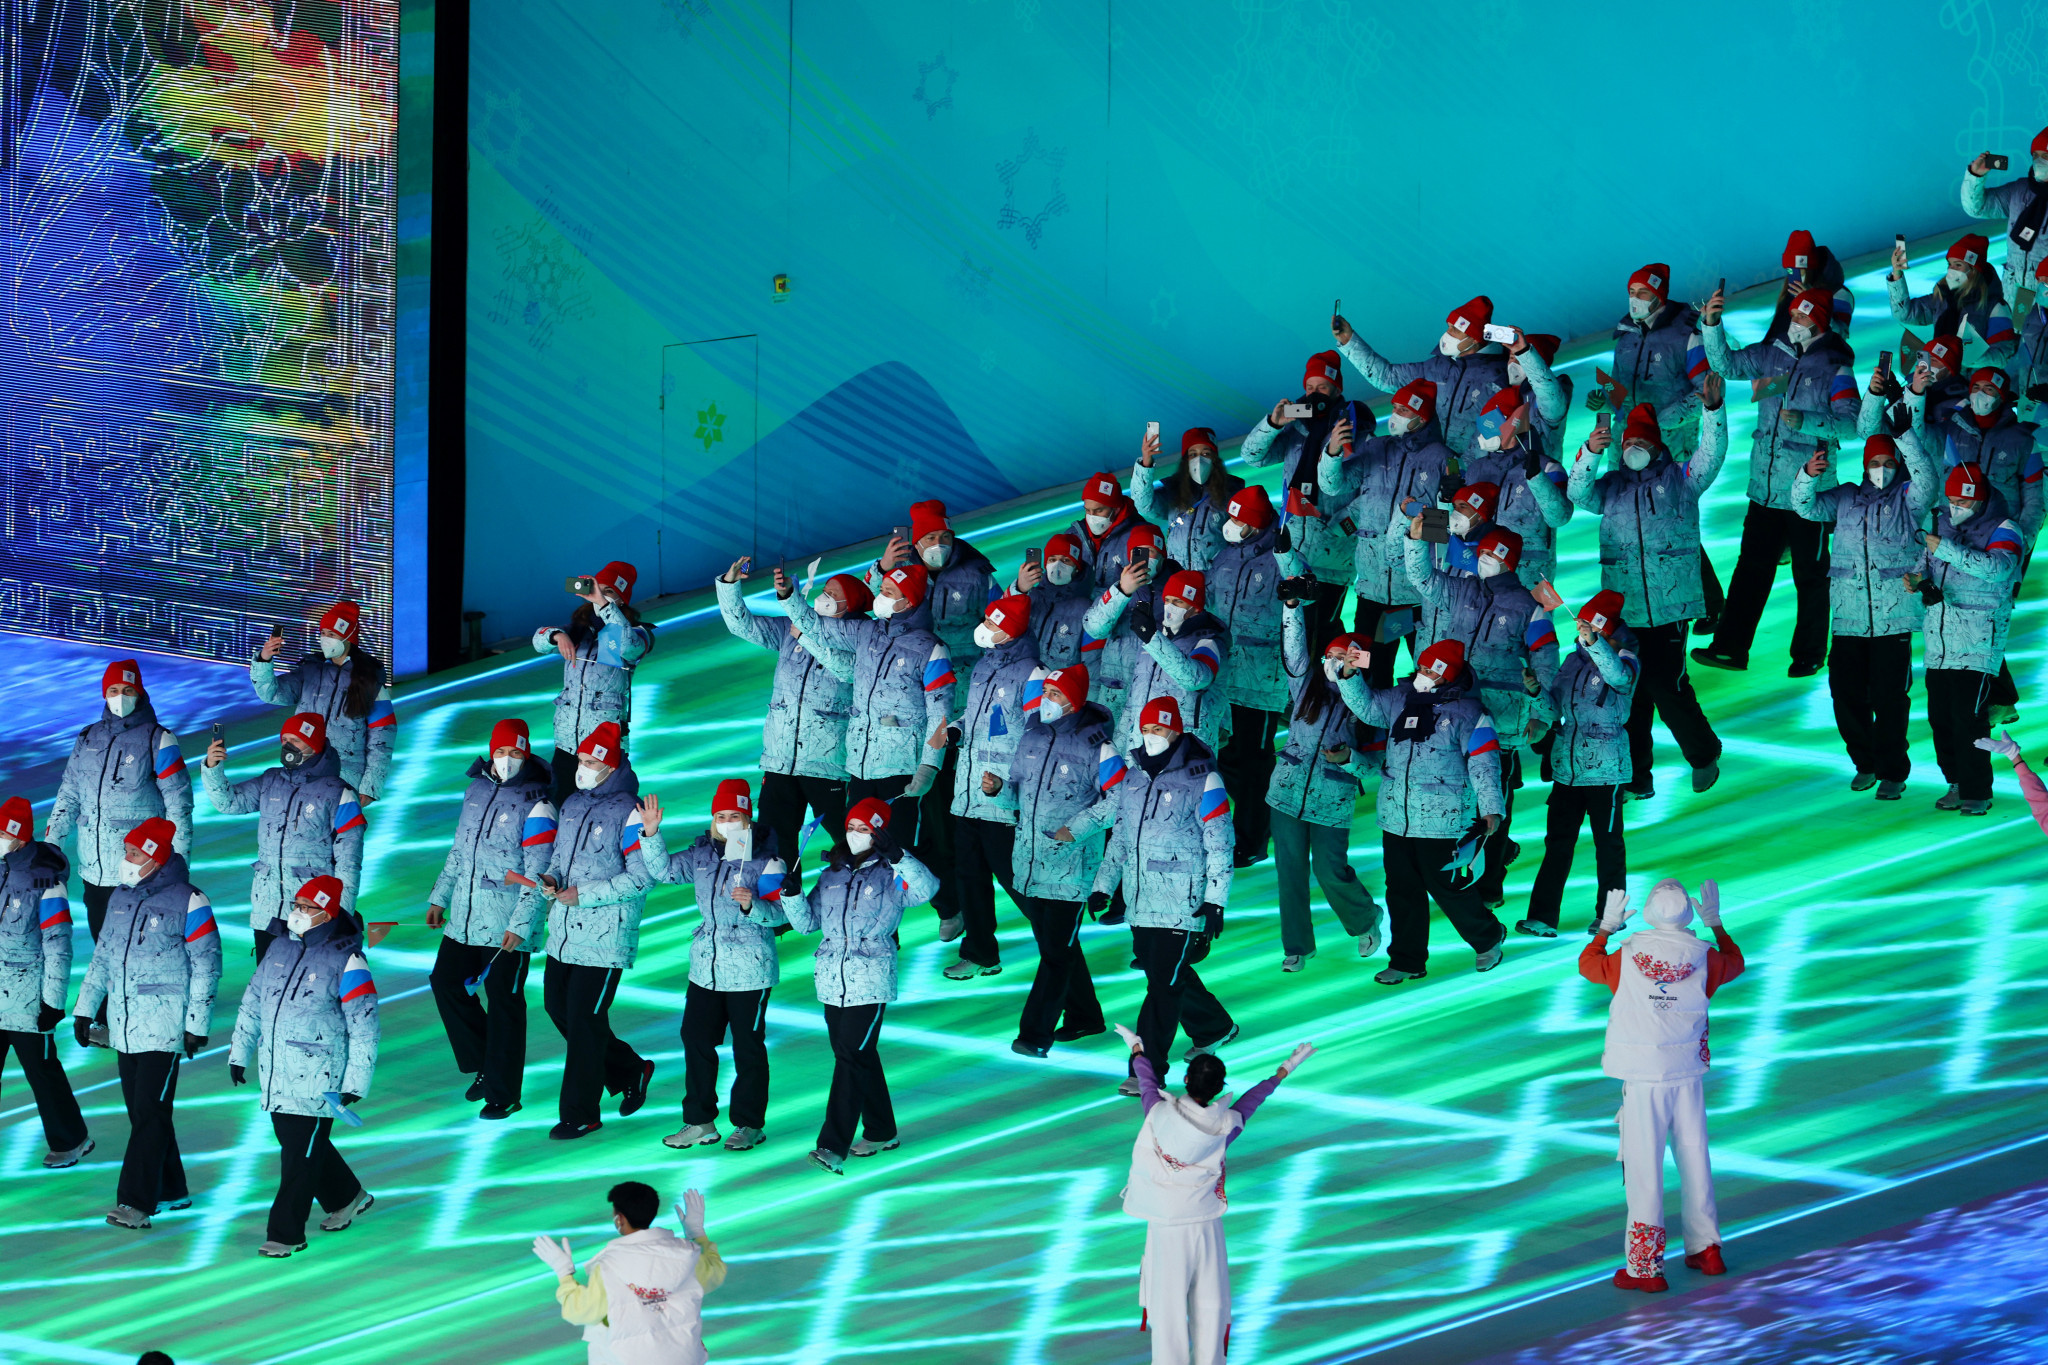 Russian Olympic Committee wear country's colours on sleeve at Beijing 2022 Opening Ceremony